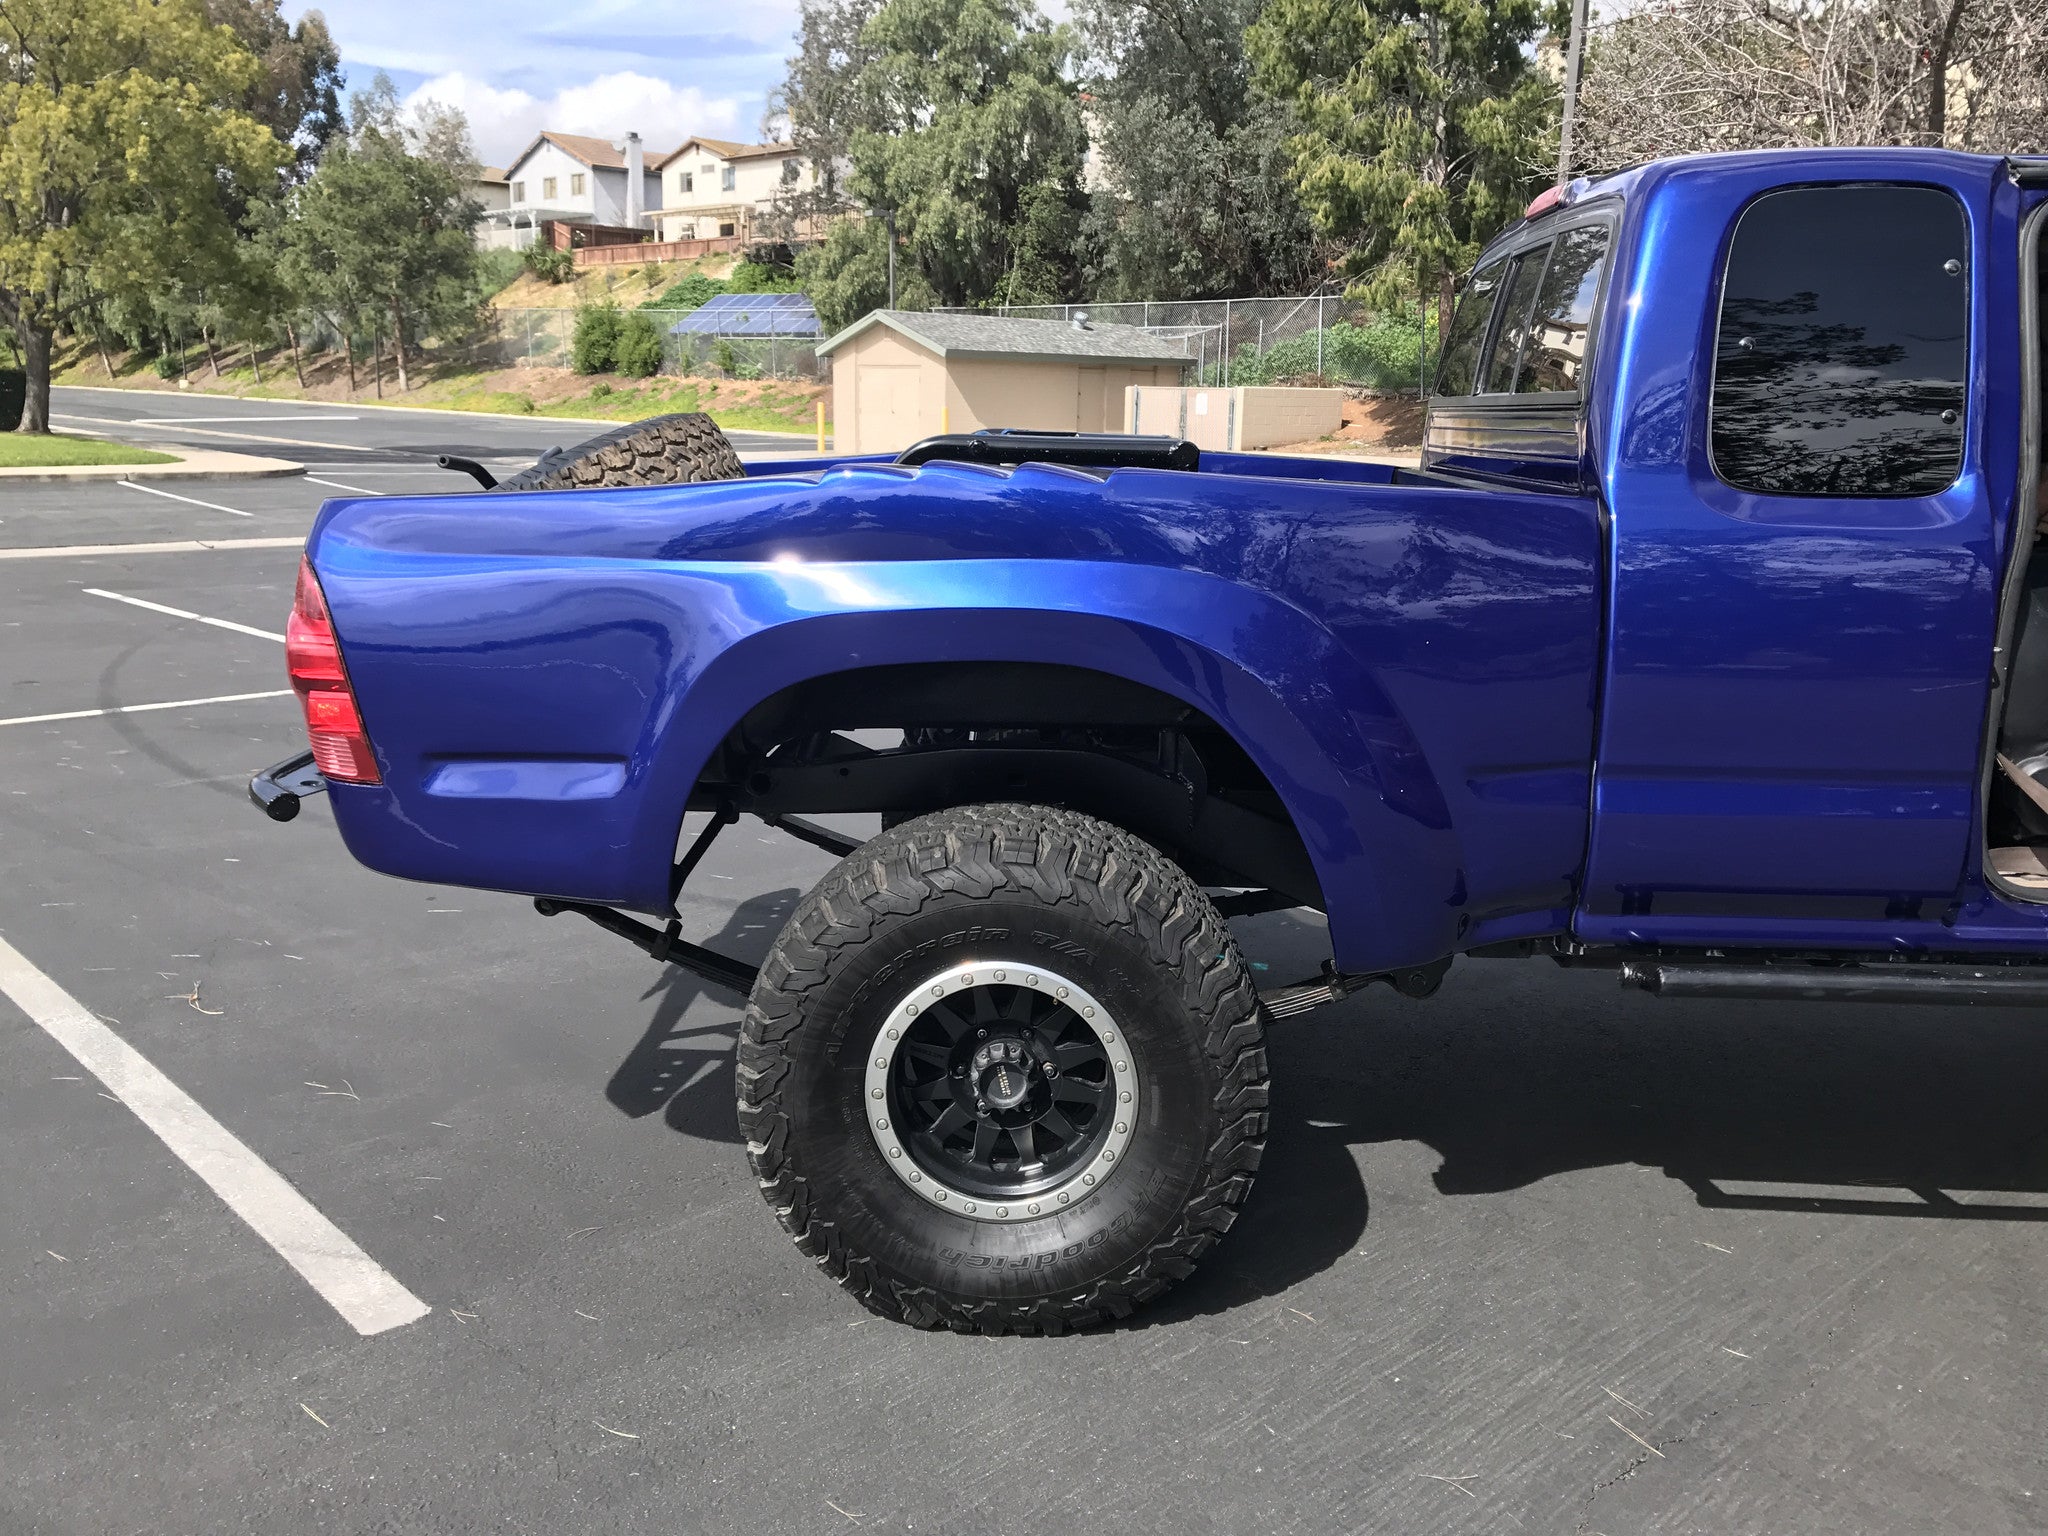 96-04 Toyota Tacoma to 2012 conversion 6" Bulge Off Road Fiberglass Bedsides - McNeil Racing Inc, Bedsides - off road fiberglass fenders, bedsides, hood, one piece, front end, fabrication, conversion